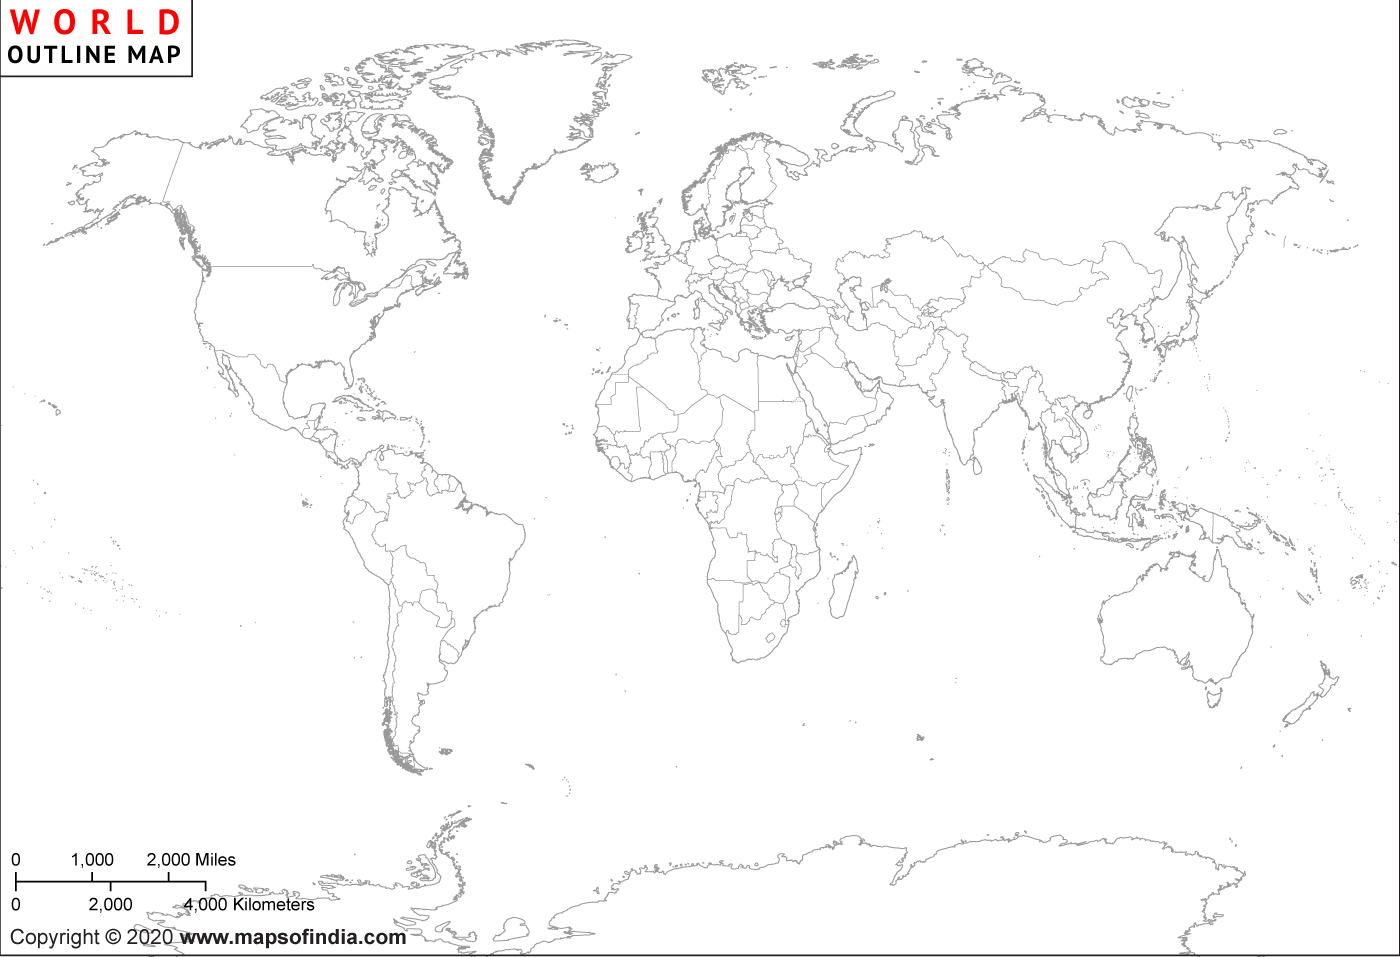 world political map black and white